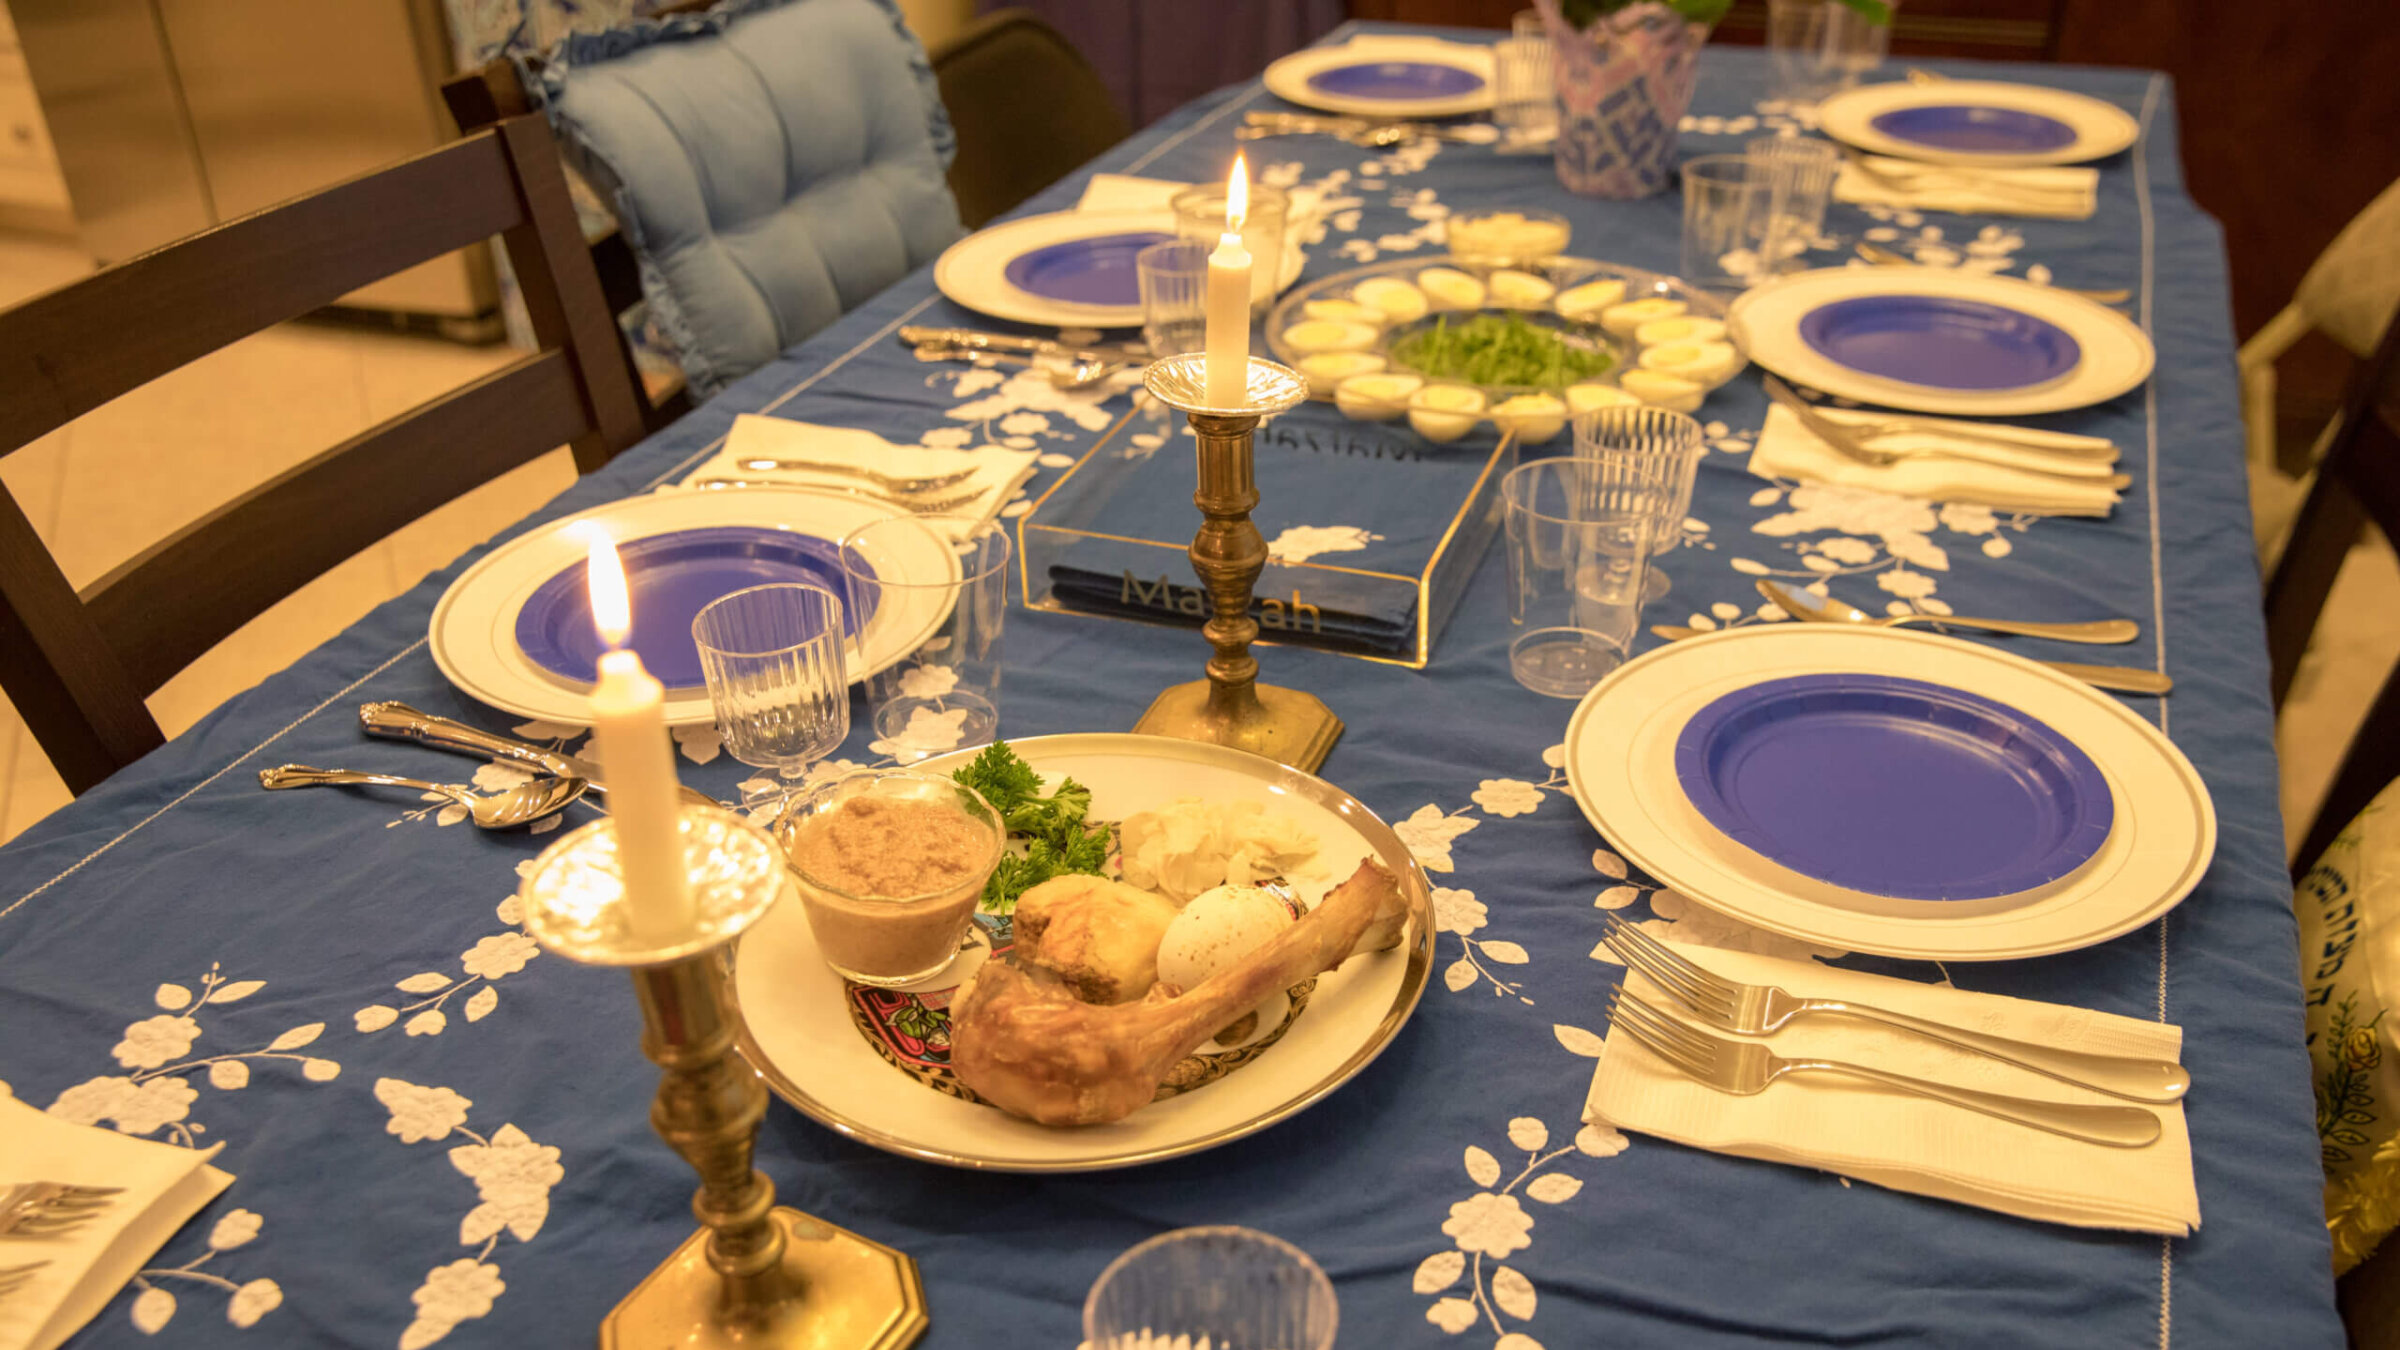 Planning a Seder can be exhausting. These great last-minute recipes can help.